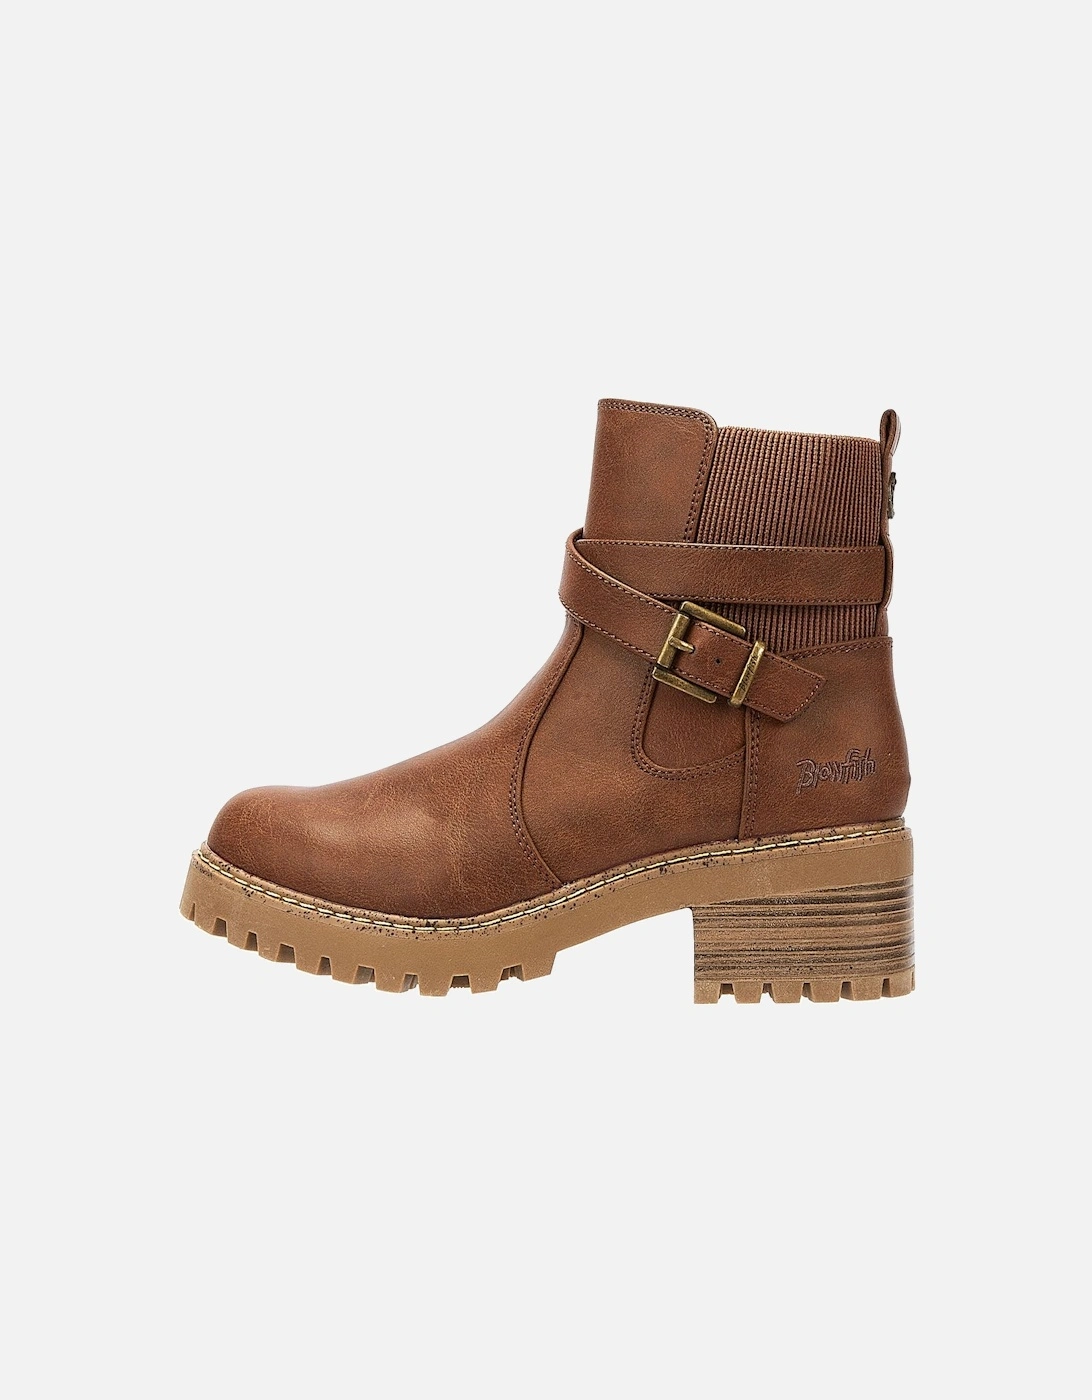 Lifted Women's Rust Boots